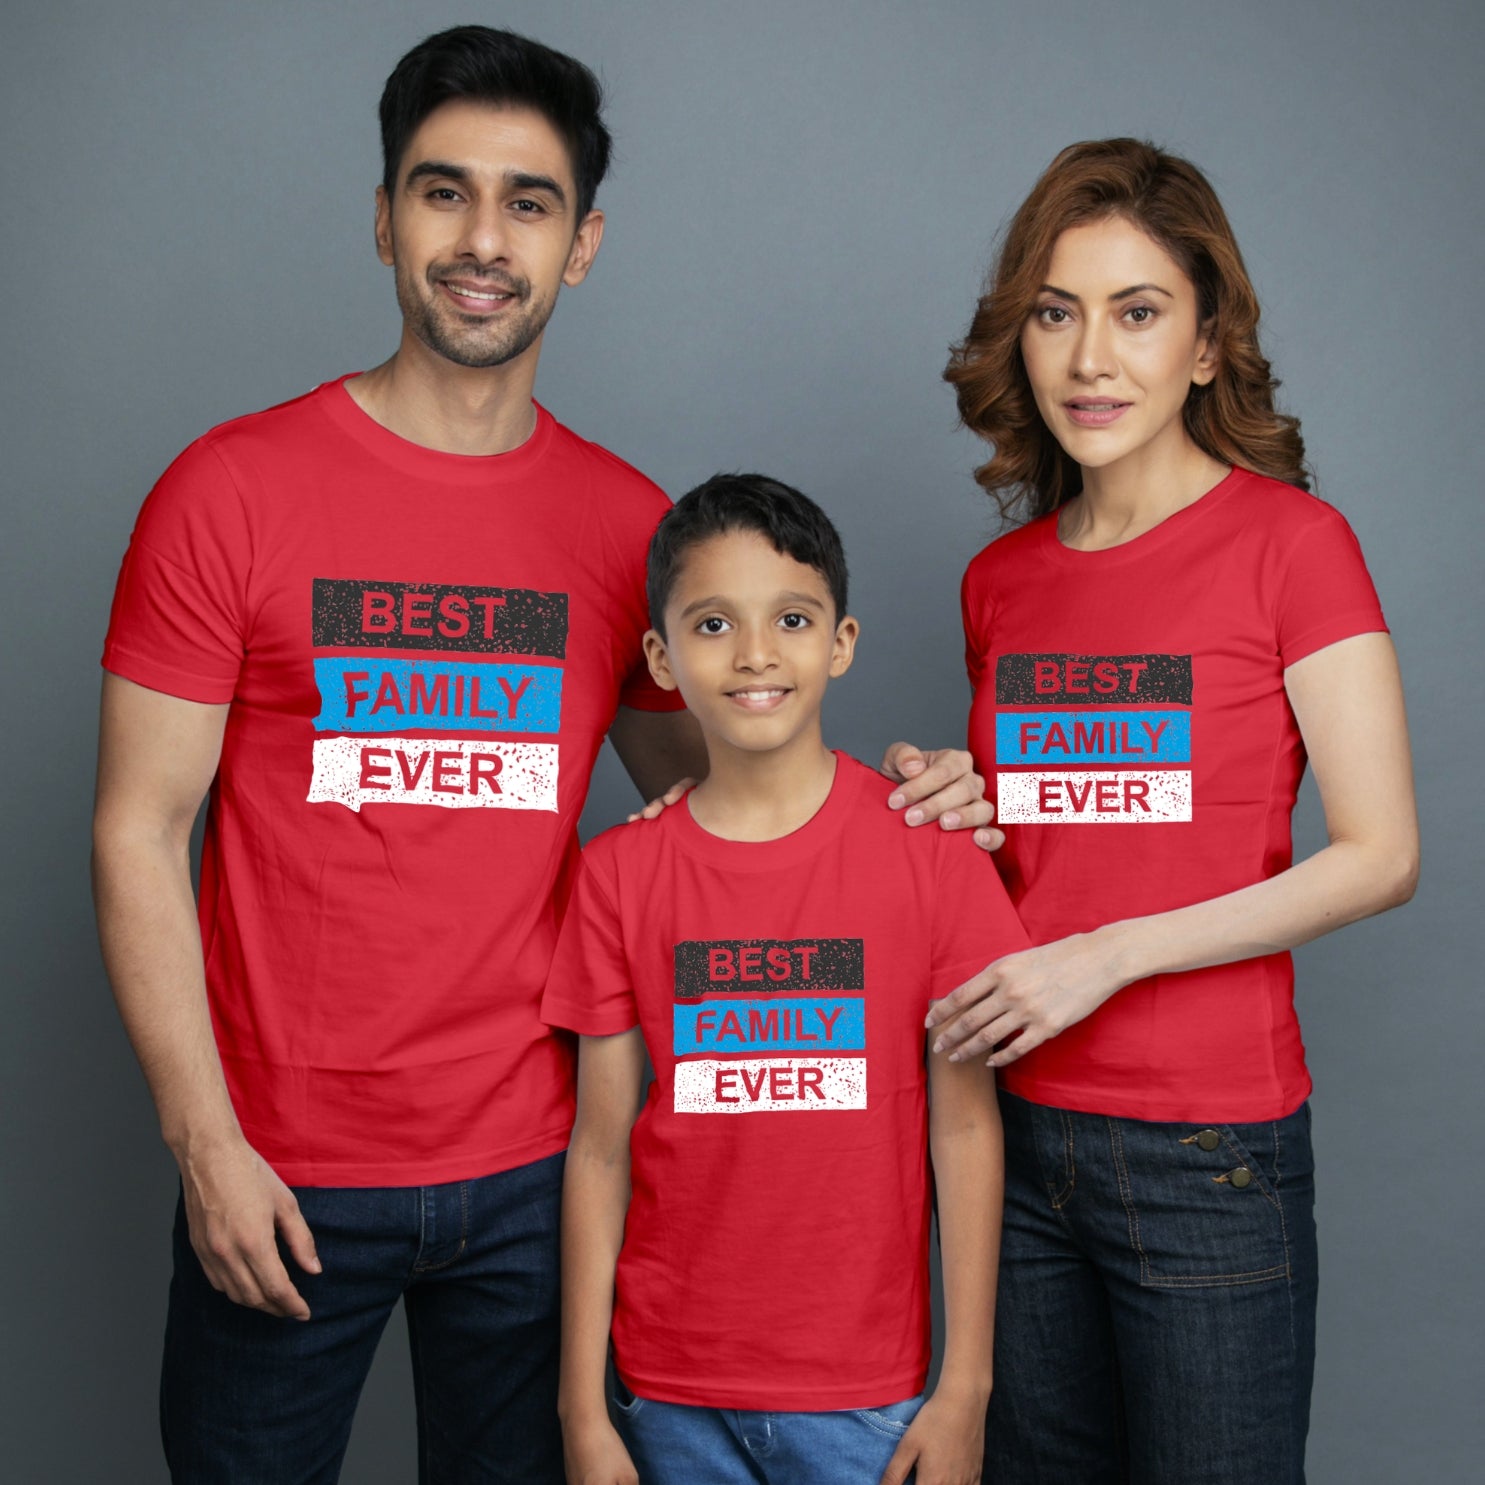 Family t shirt set of 3 Mom Dad Son in Red Colour - Best Family Ever Variant